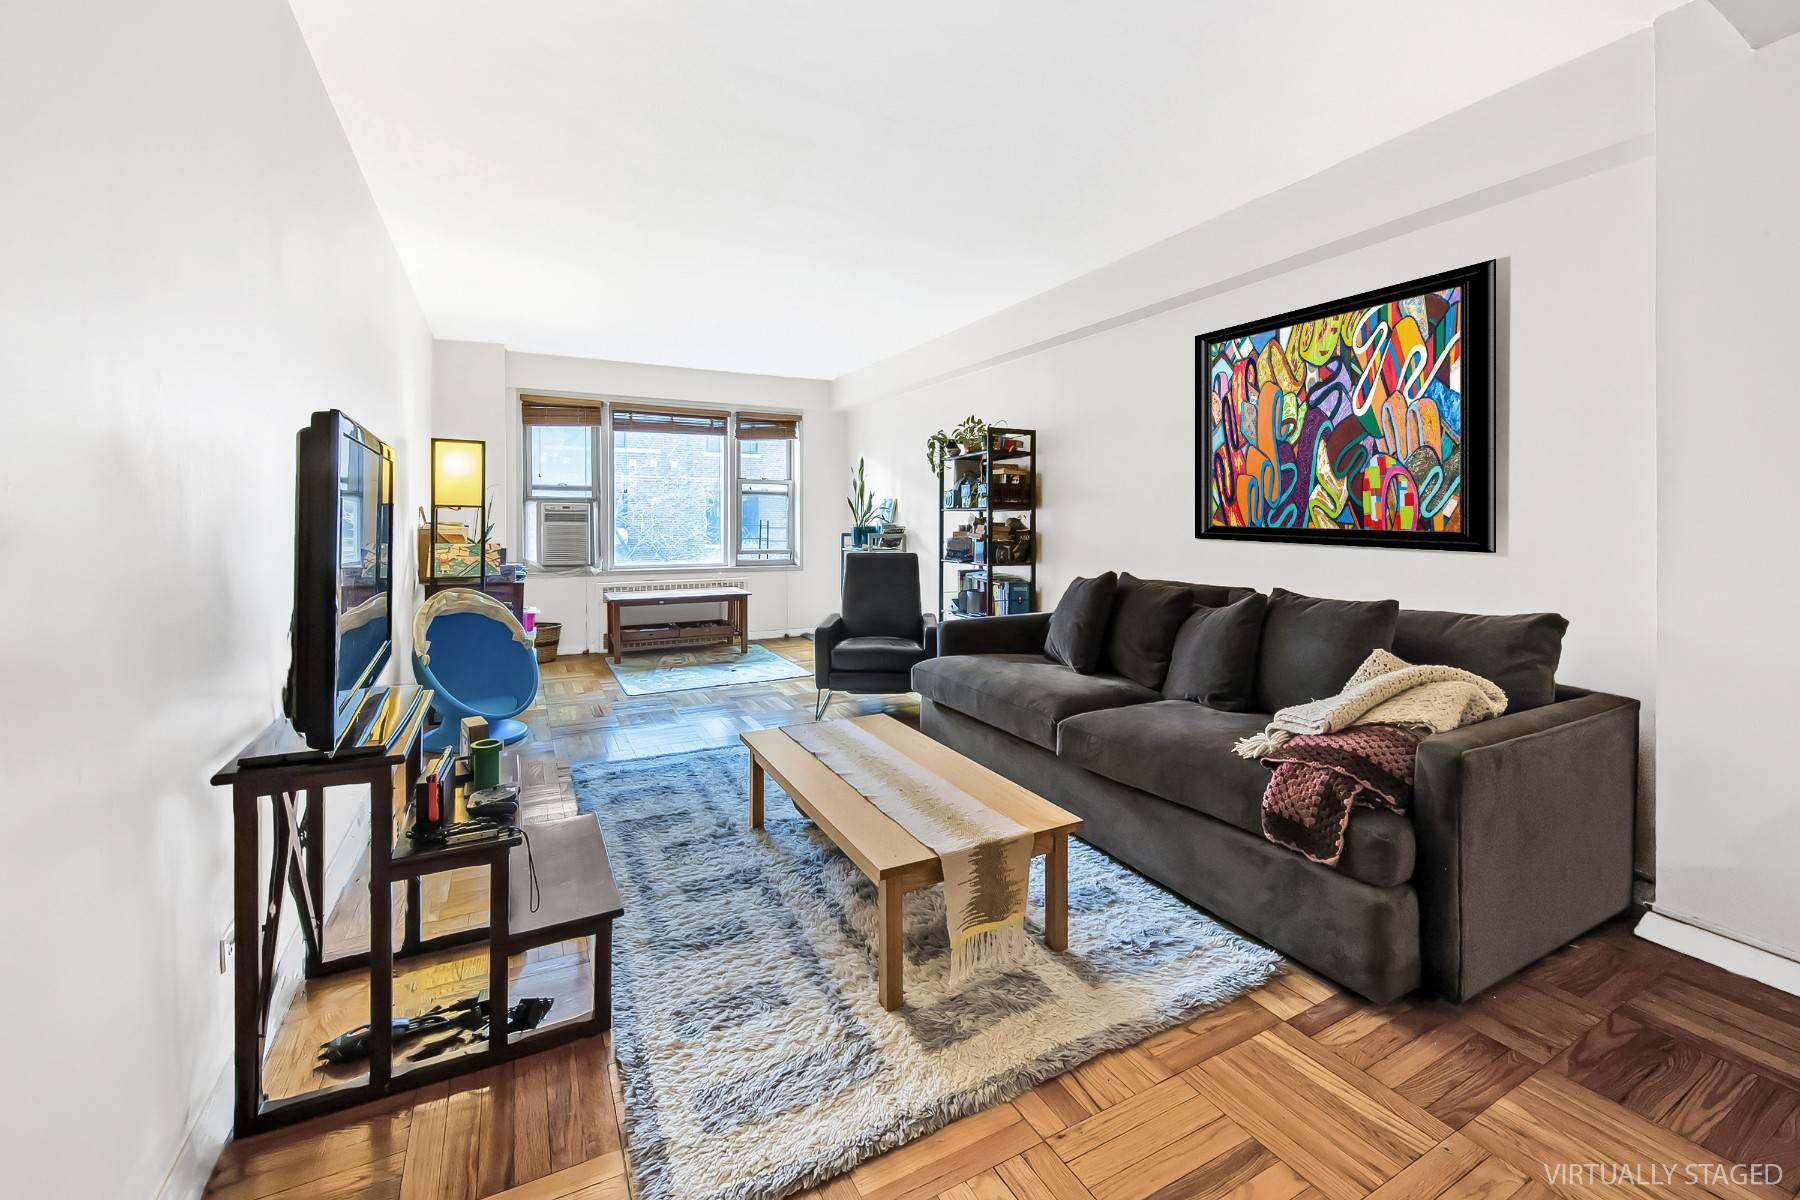 Beautiful and highly desirable one bedroom cooperative apartment in this full service Art Deco style building, located on the tree lined, quiet block in the heart of Brooklyn Heights.